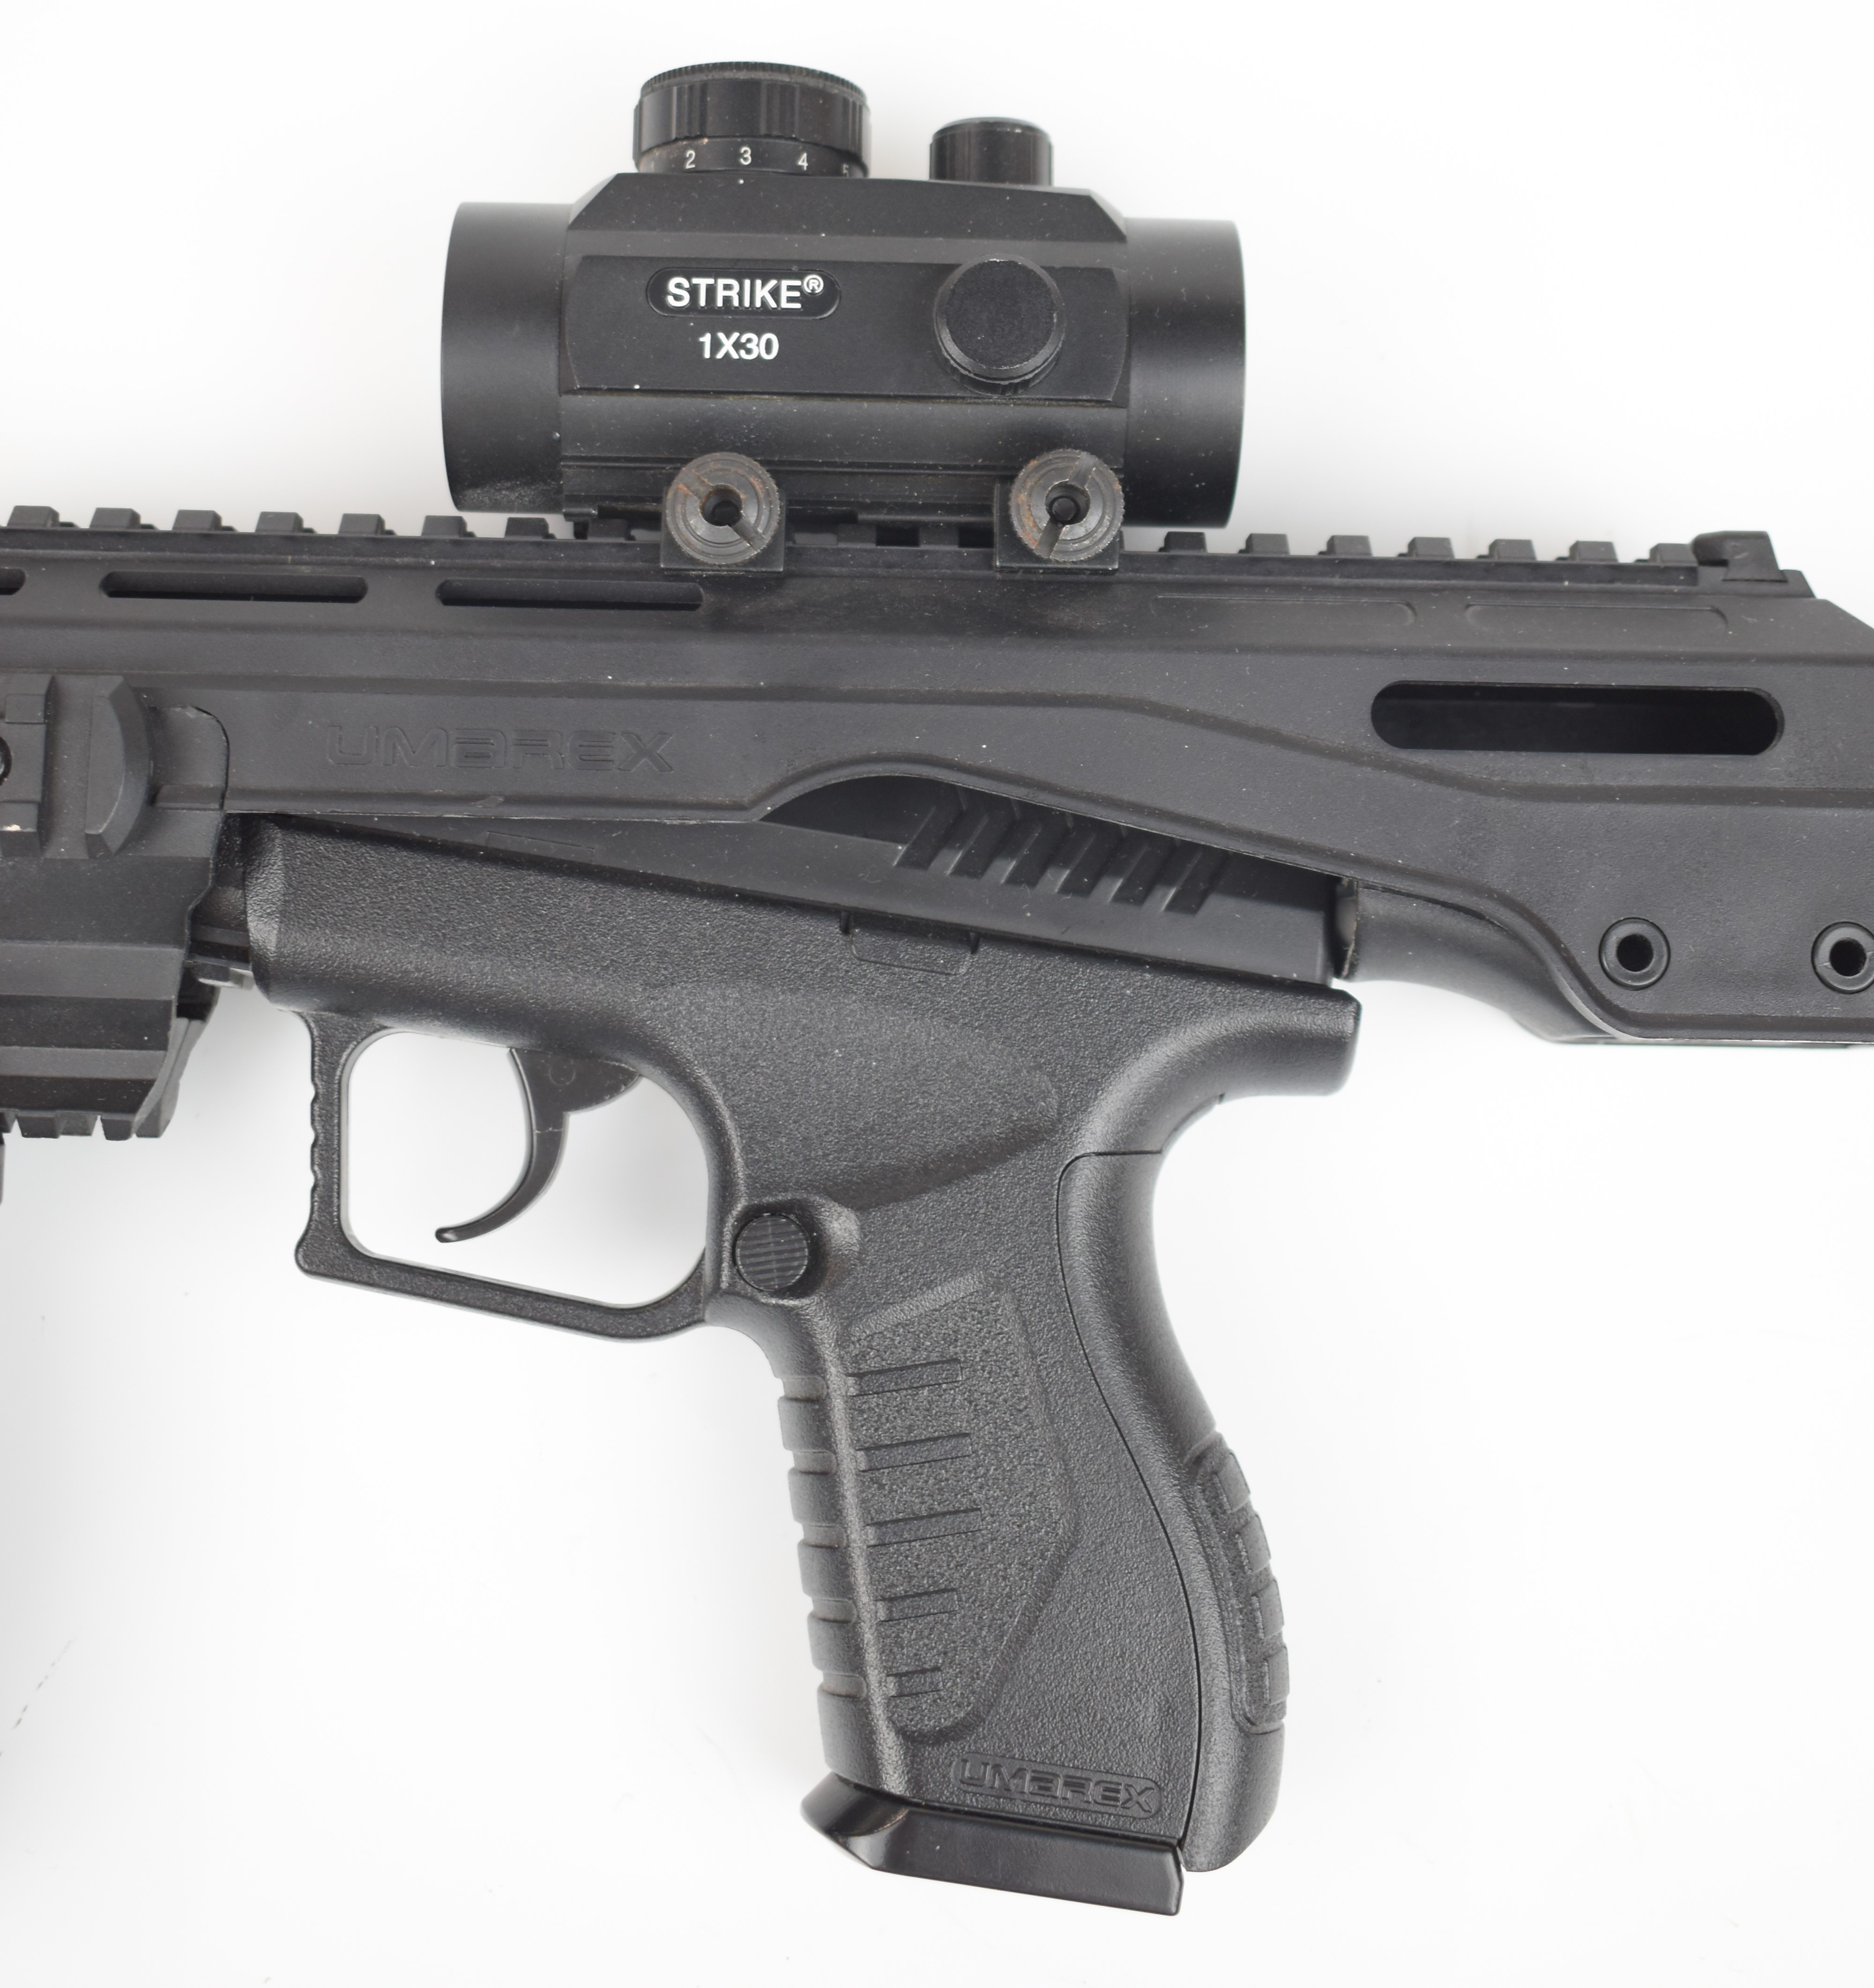 Umarex XBG .177 air pistol with Tac Kit and Strike 1x30 scope, serial number 13F73956. - Image 5 of 14